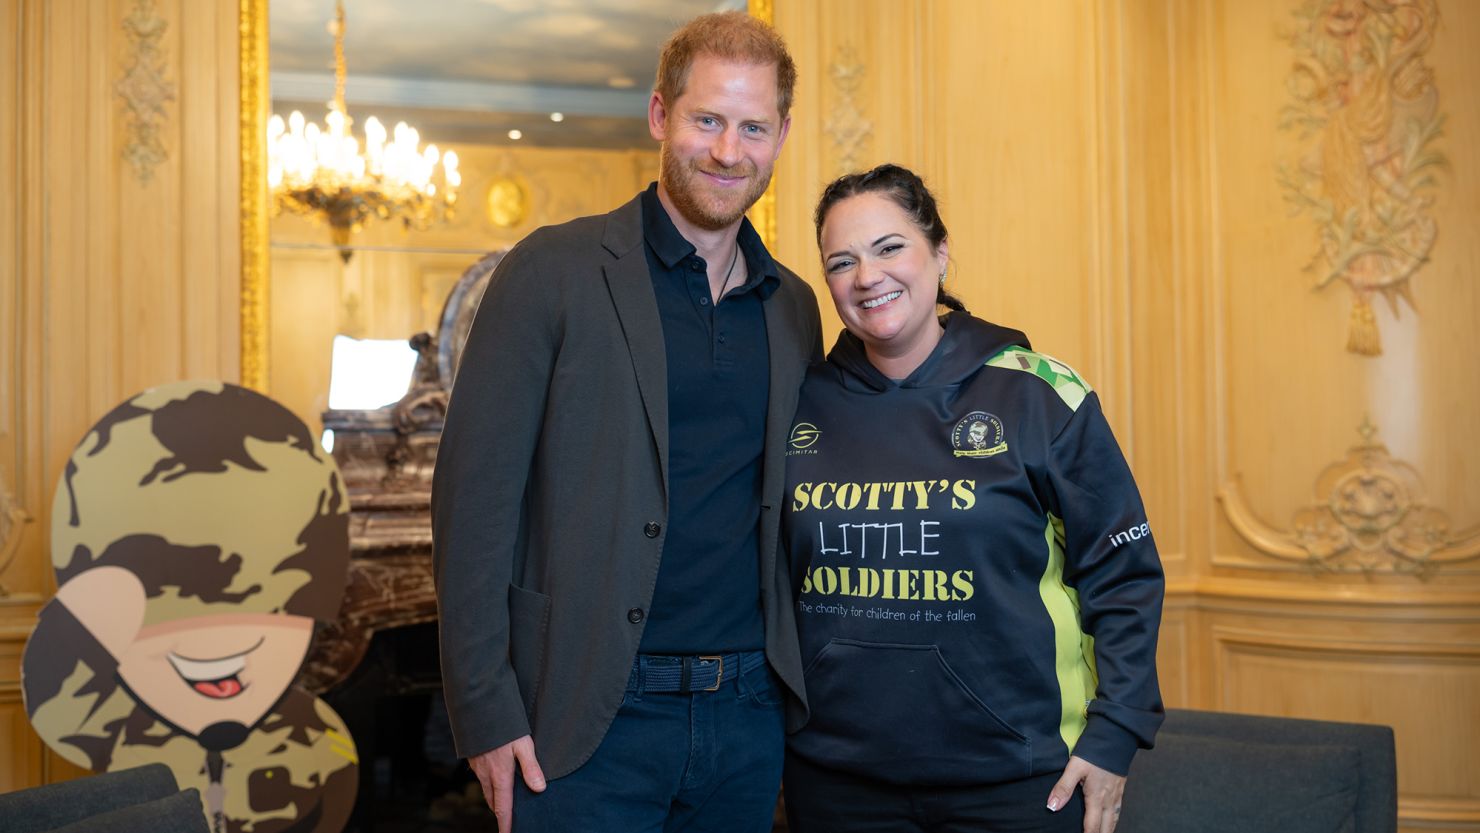 Prince Harry, Duke of Sussex (left) and Nikki Scott, founder of the Scotty's Little Soldiers charity (right)